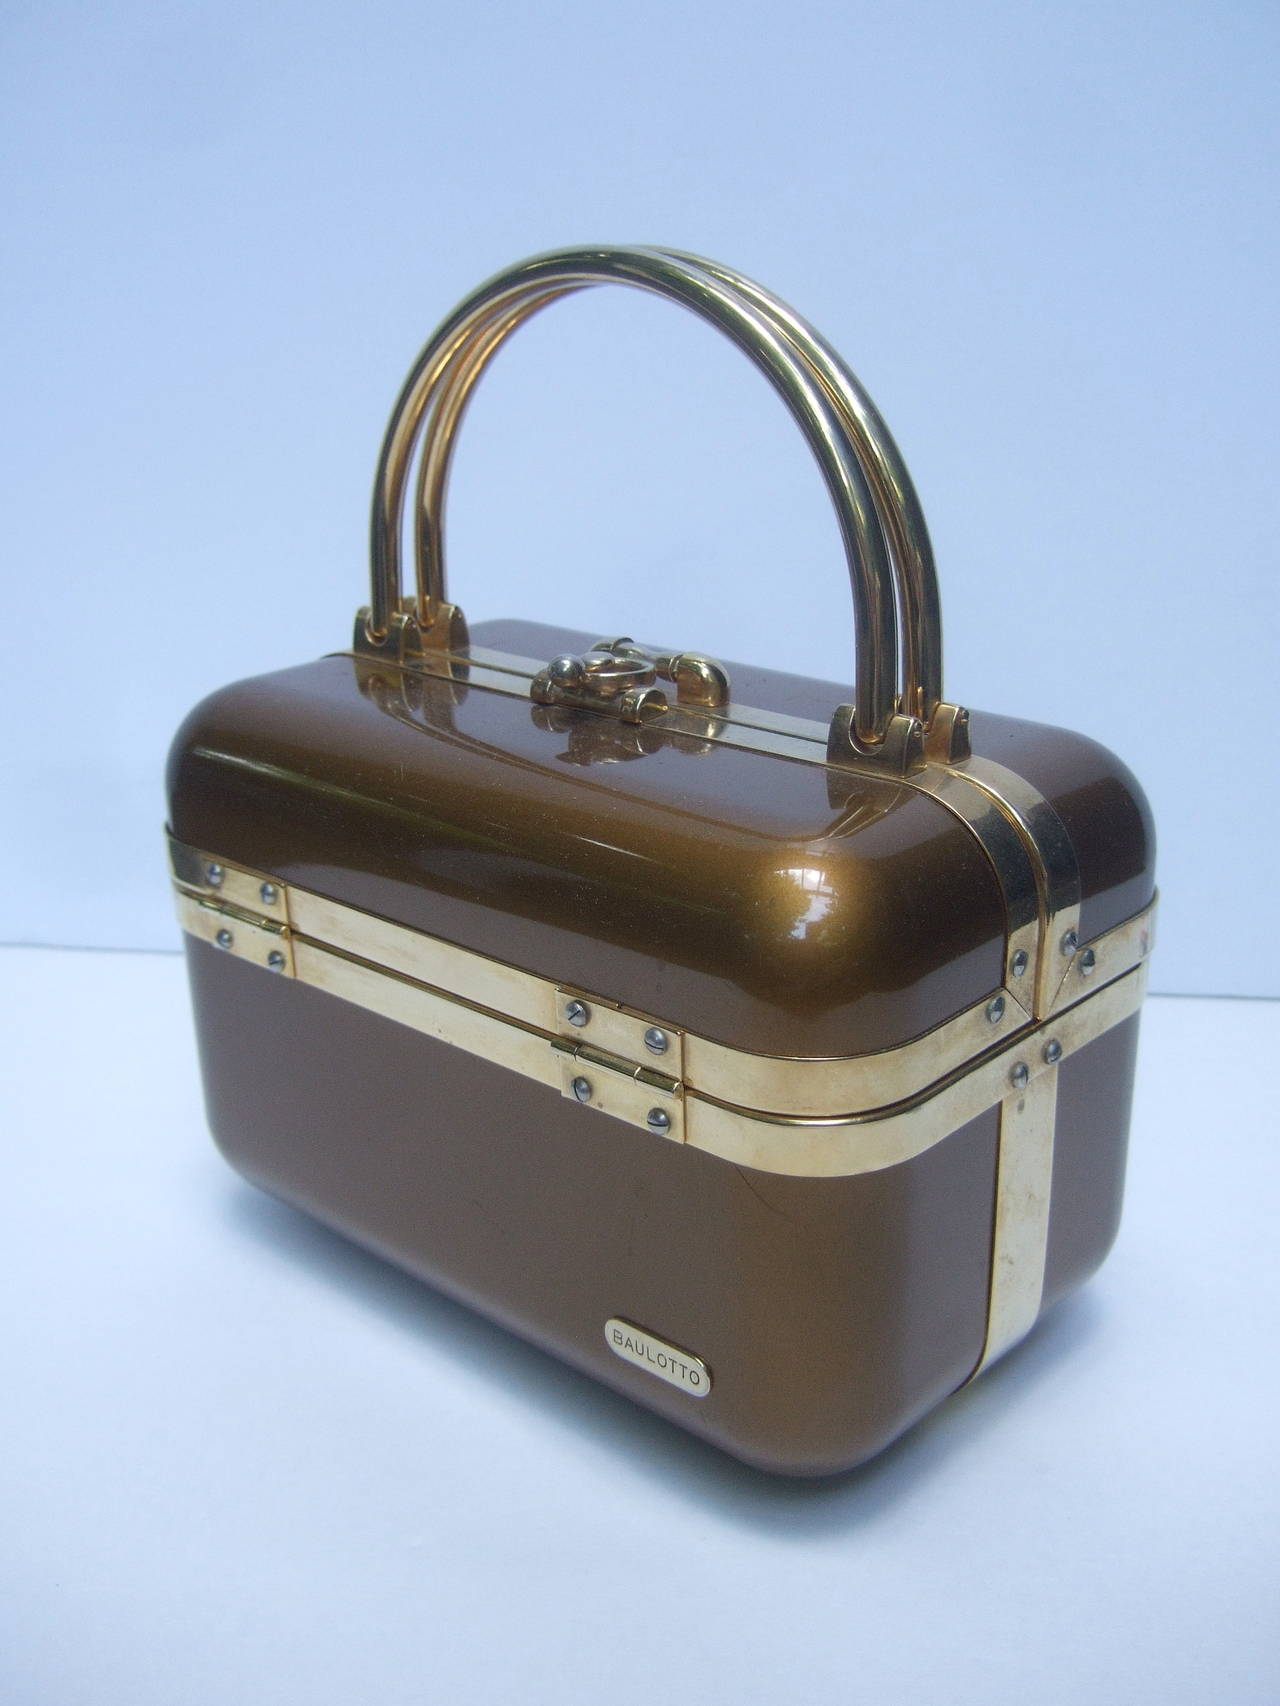 Sleek 1970s Italian bronze lucite handbag designed by Baulotto
The posh Italian handbag is designed with glossy gold metallic 
lucite. The molded panels are accented with gilt metal bands
and hardware. Baulotto in Italian means trunk  

The interior